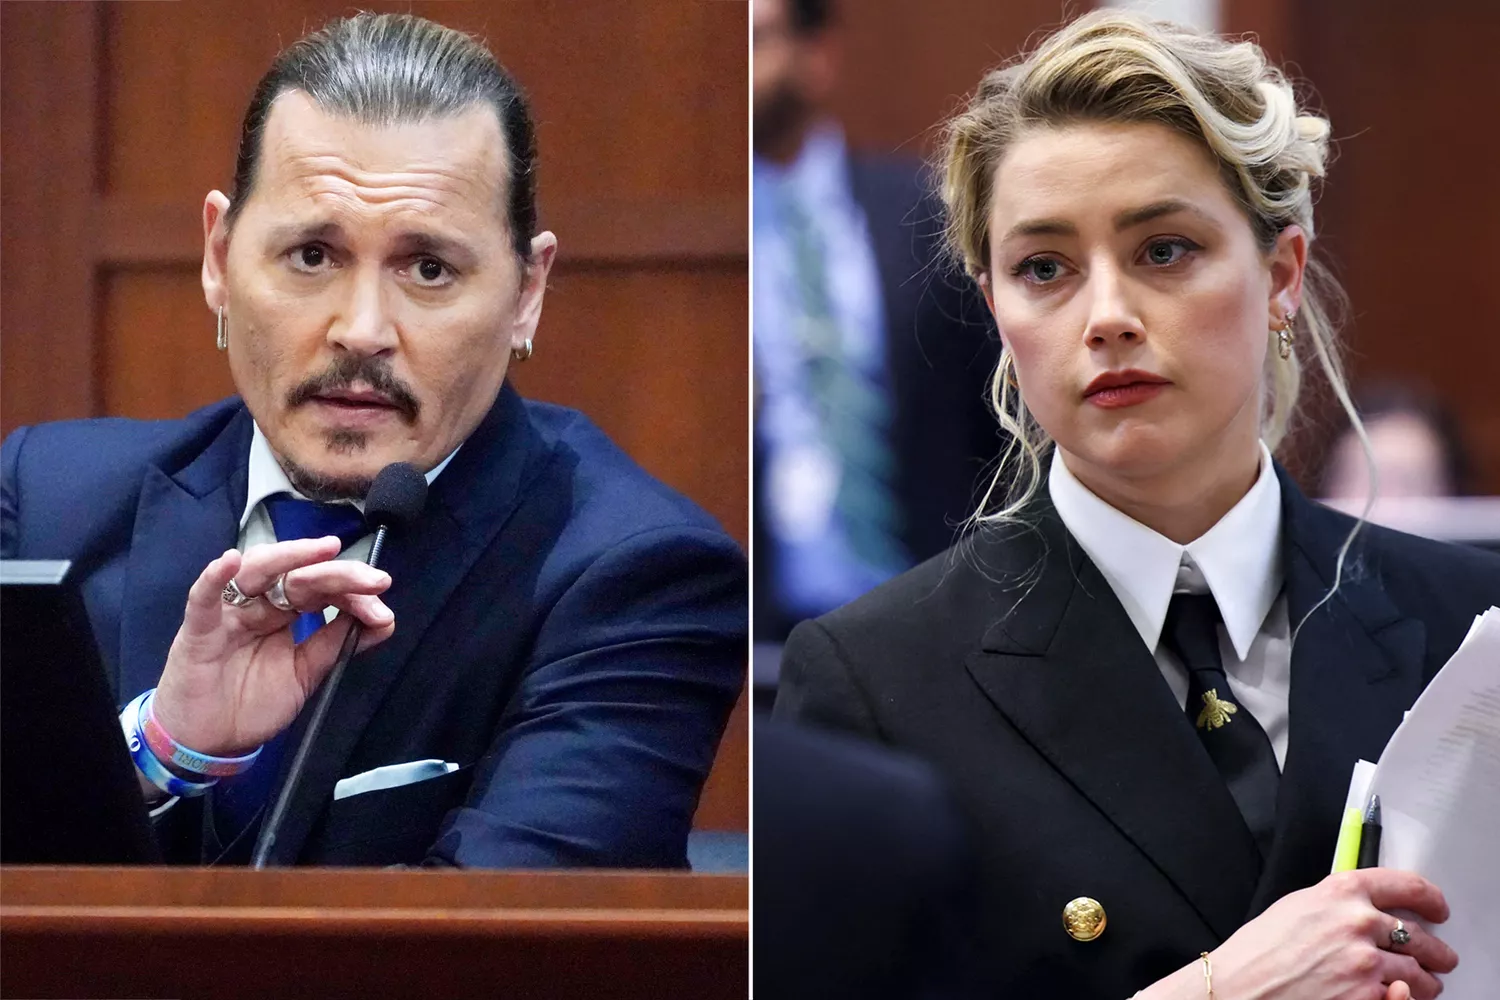 Amber Heard Pays Johnny Depp $1 Million Settlement 1 Year After Trial, Depp to Donate It to 5 Charities 1